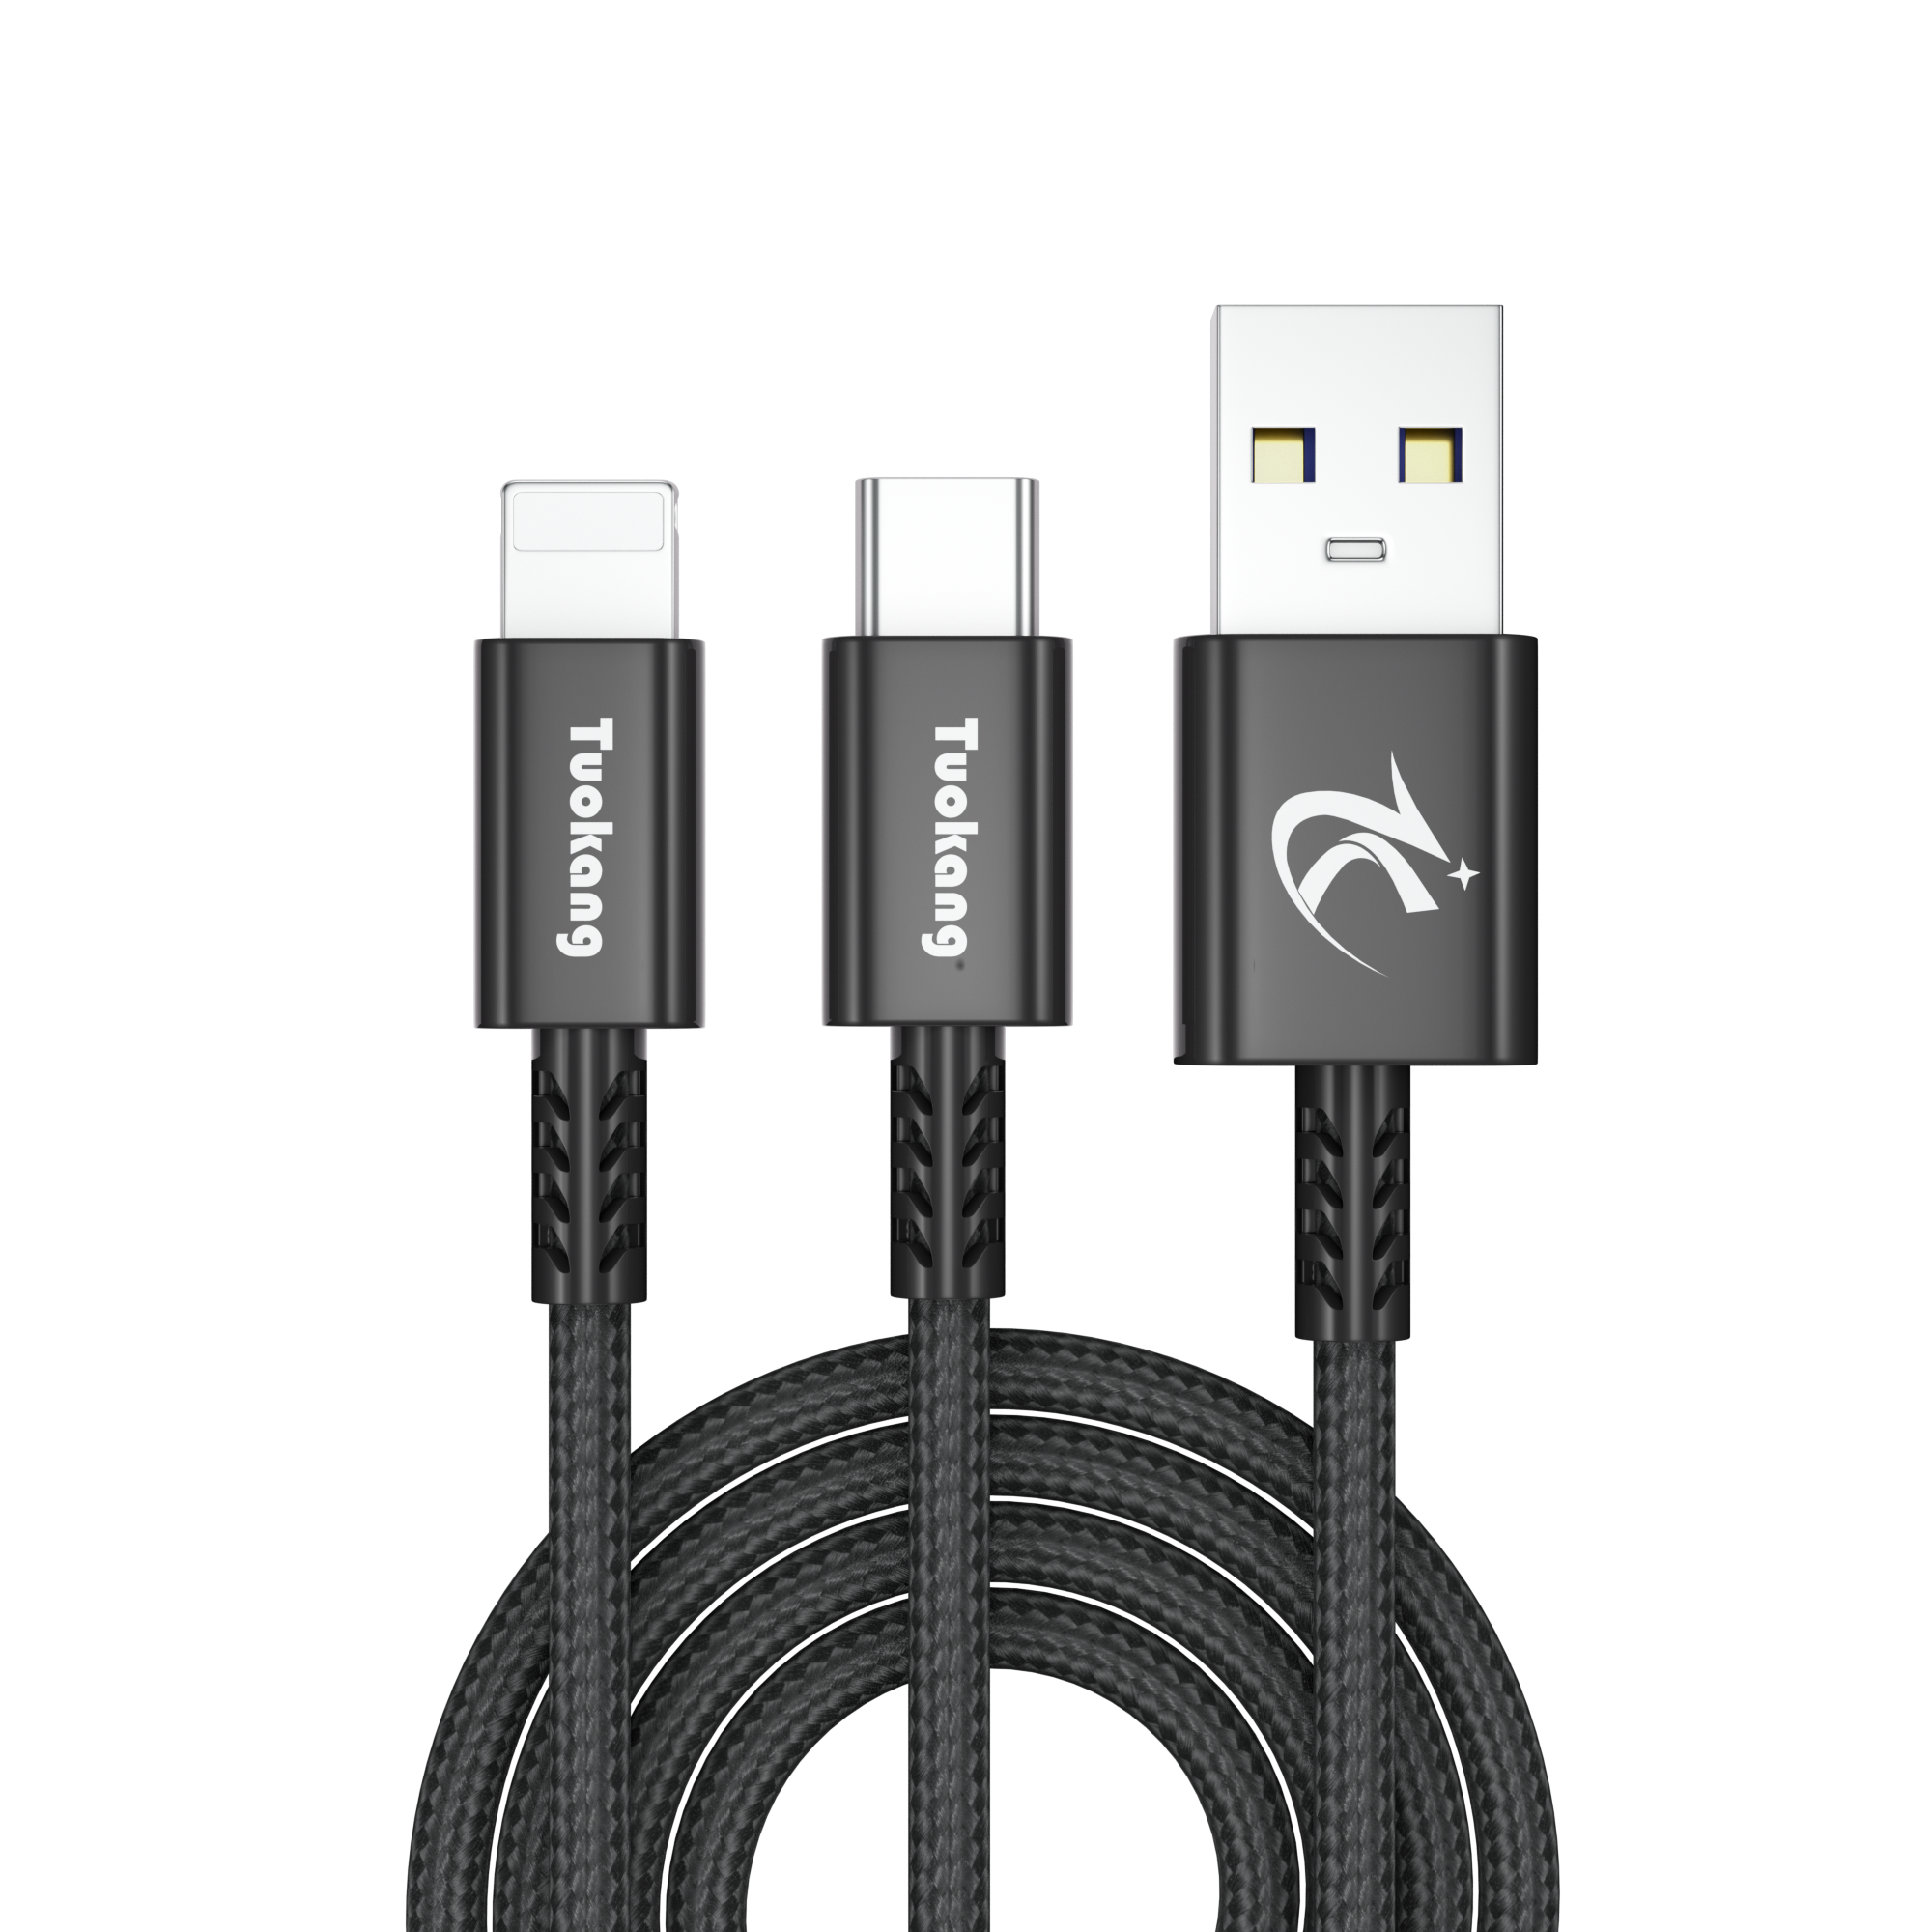 Mobile phone cable, 3 in 1 fast power charge cable